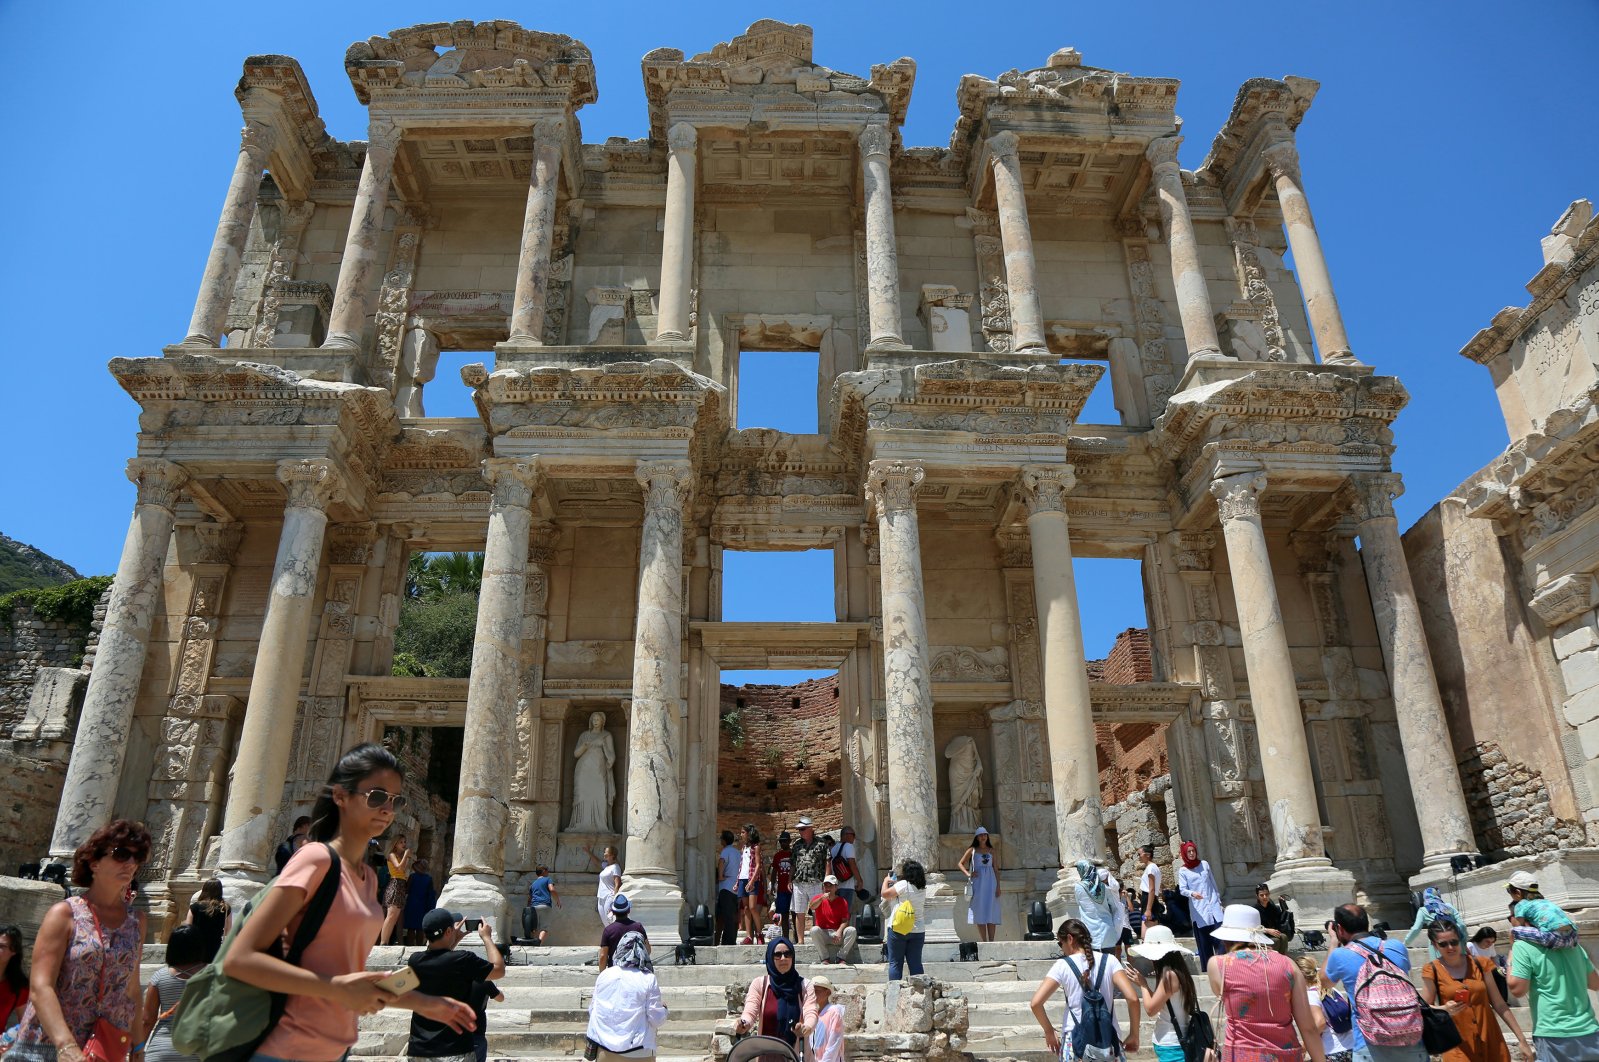 Tourists visit the Celsius Library in the ancient city of Ephesus near İzmir in the western Aegean region, Turkey, Aug. 5, 2018. (Reuters Photo)